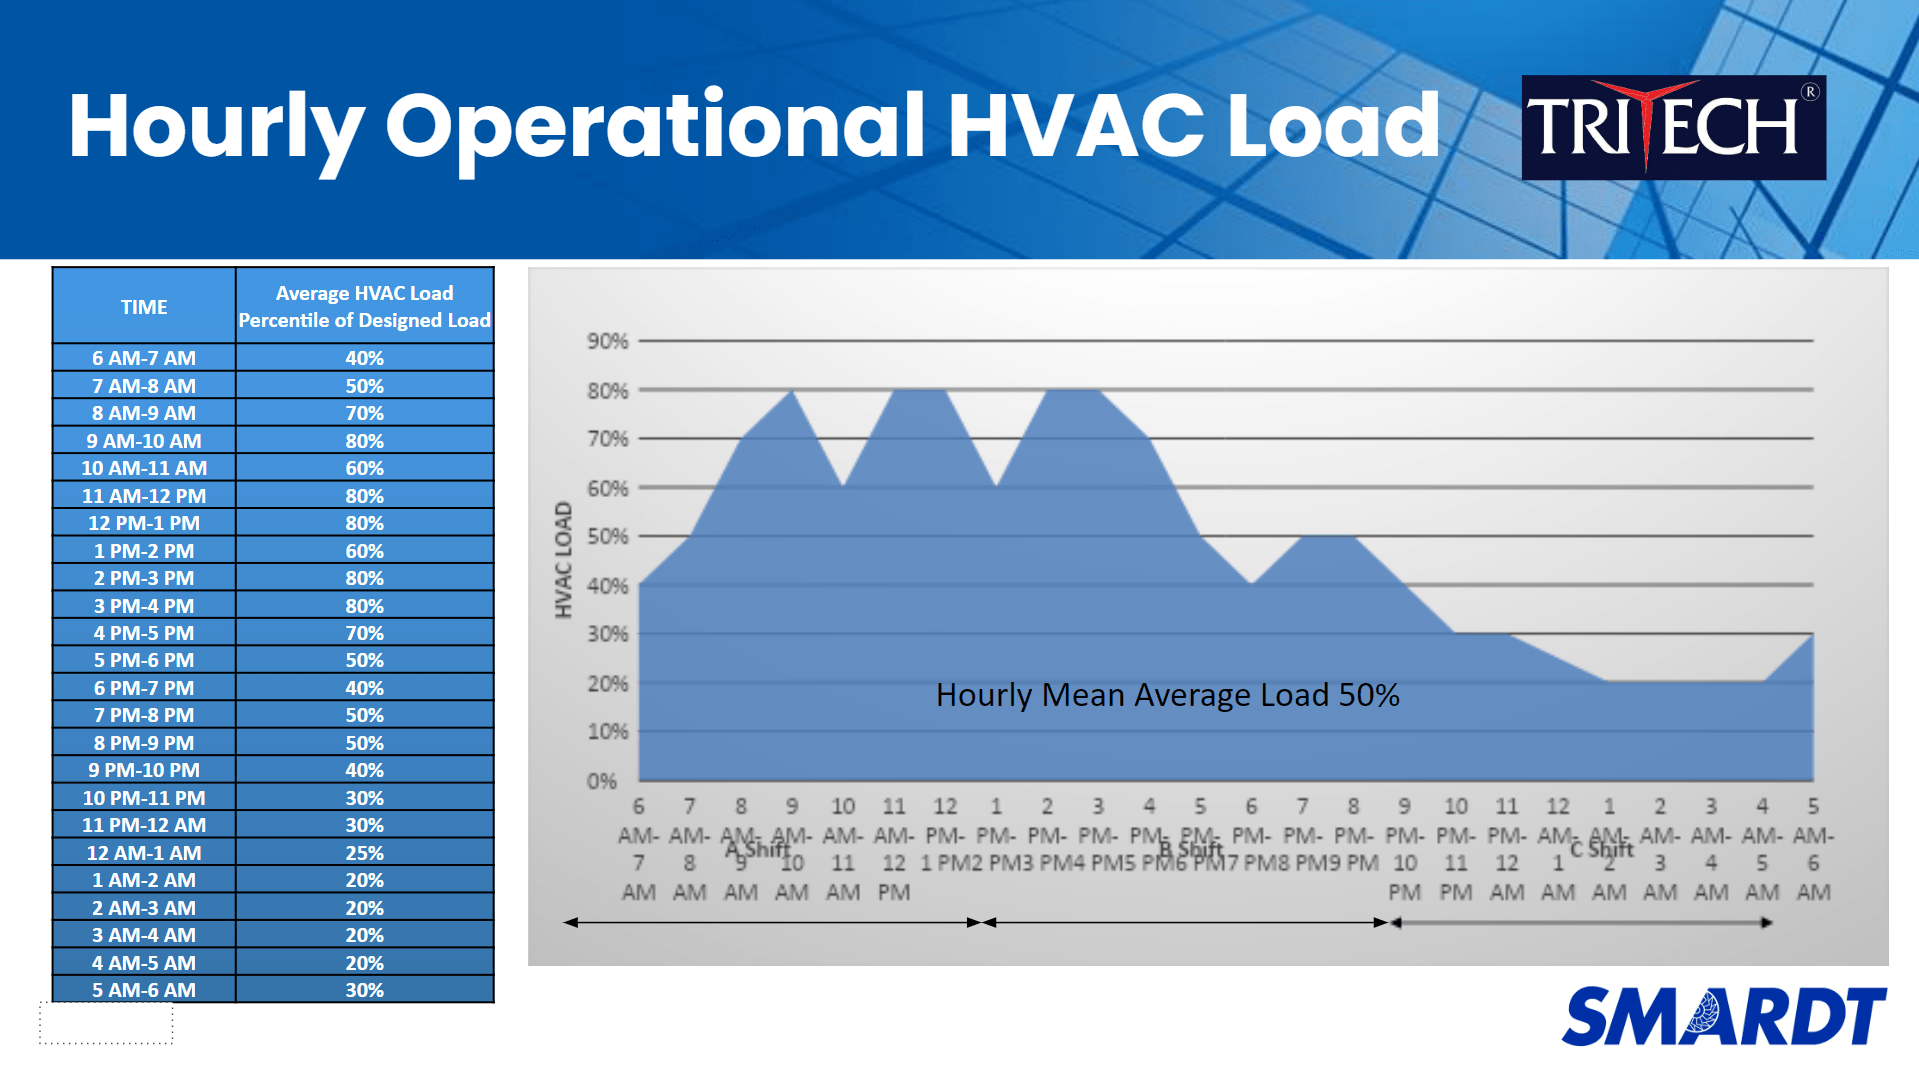 Hourly Operational HVAC Load in Pharmaceuticals